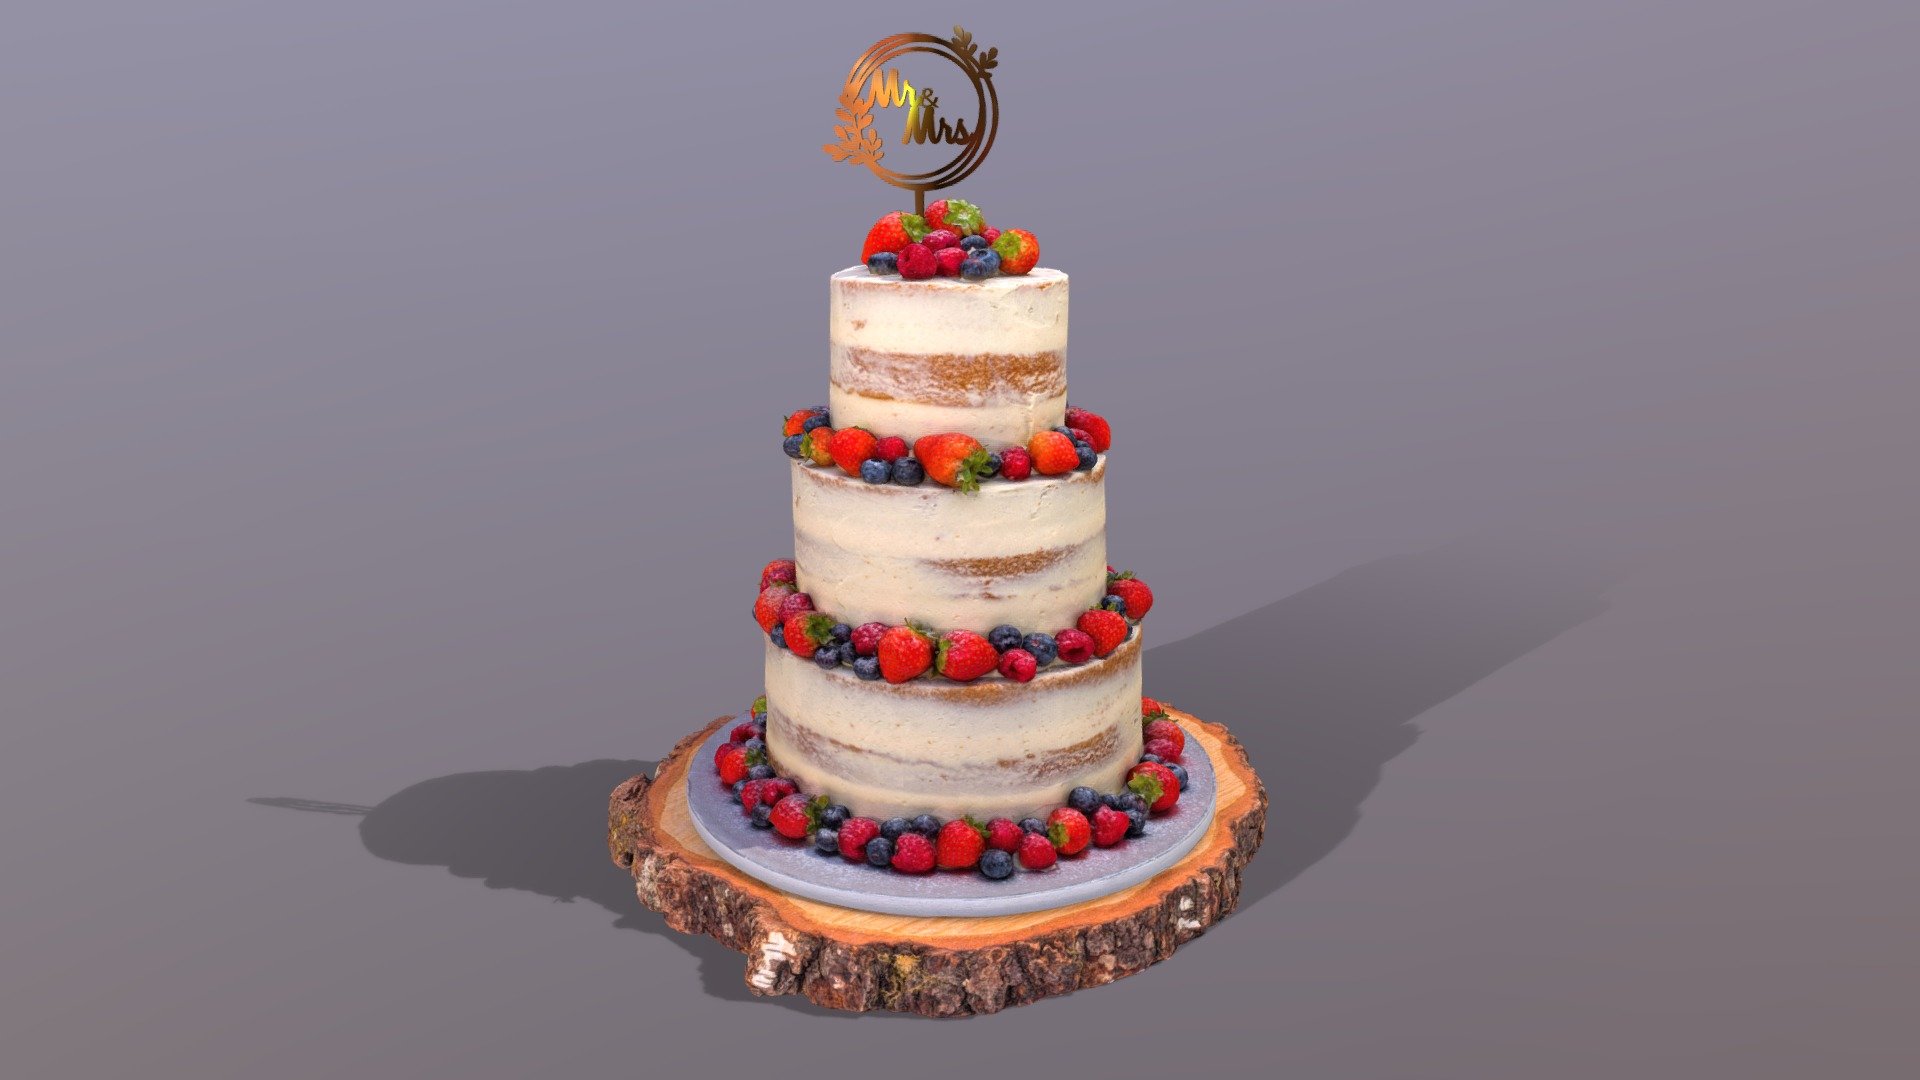 3D scan of a Rustic Semi Naked Berry Wedding Cake on the wooden log slice with Mr&amp;Mrs cake topper which is made by CAKESBURG Online Premium Cake Shop in UK. You can also purchase actual cake from this link: https://cakesburg.co.uk/products/naked-wedding-cake?_pos=1&amp;_sid=934af8144&amp;_ss=r




Cake Textures 4096*4096px PBR photoscan-based materials (Base Color, Normal, Roughness, Specular, AO)

Wooden Log Slice Textures 4096*4096px PBR photoscan-based materials (Base Color, Normal, Roughness, Specular, AO)

Mr&amp;Mrs Cake Topper has just golden material
 - Semi Naked Berry Wedding Cake on Wooden Slice - Buy Royalty Free 3D model by Cakesburg Premium 3D Cake Shop (@Viscom_Cakesburg) 3d model